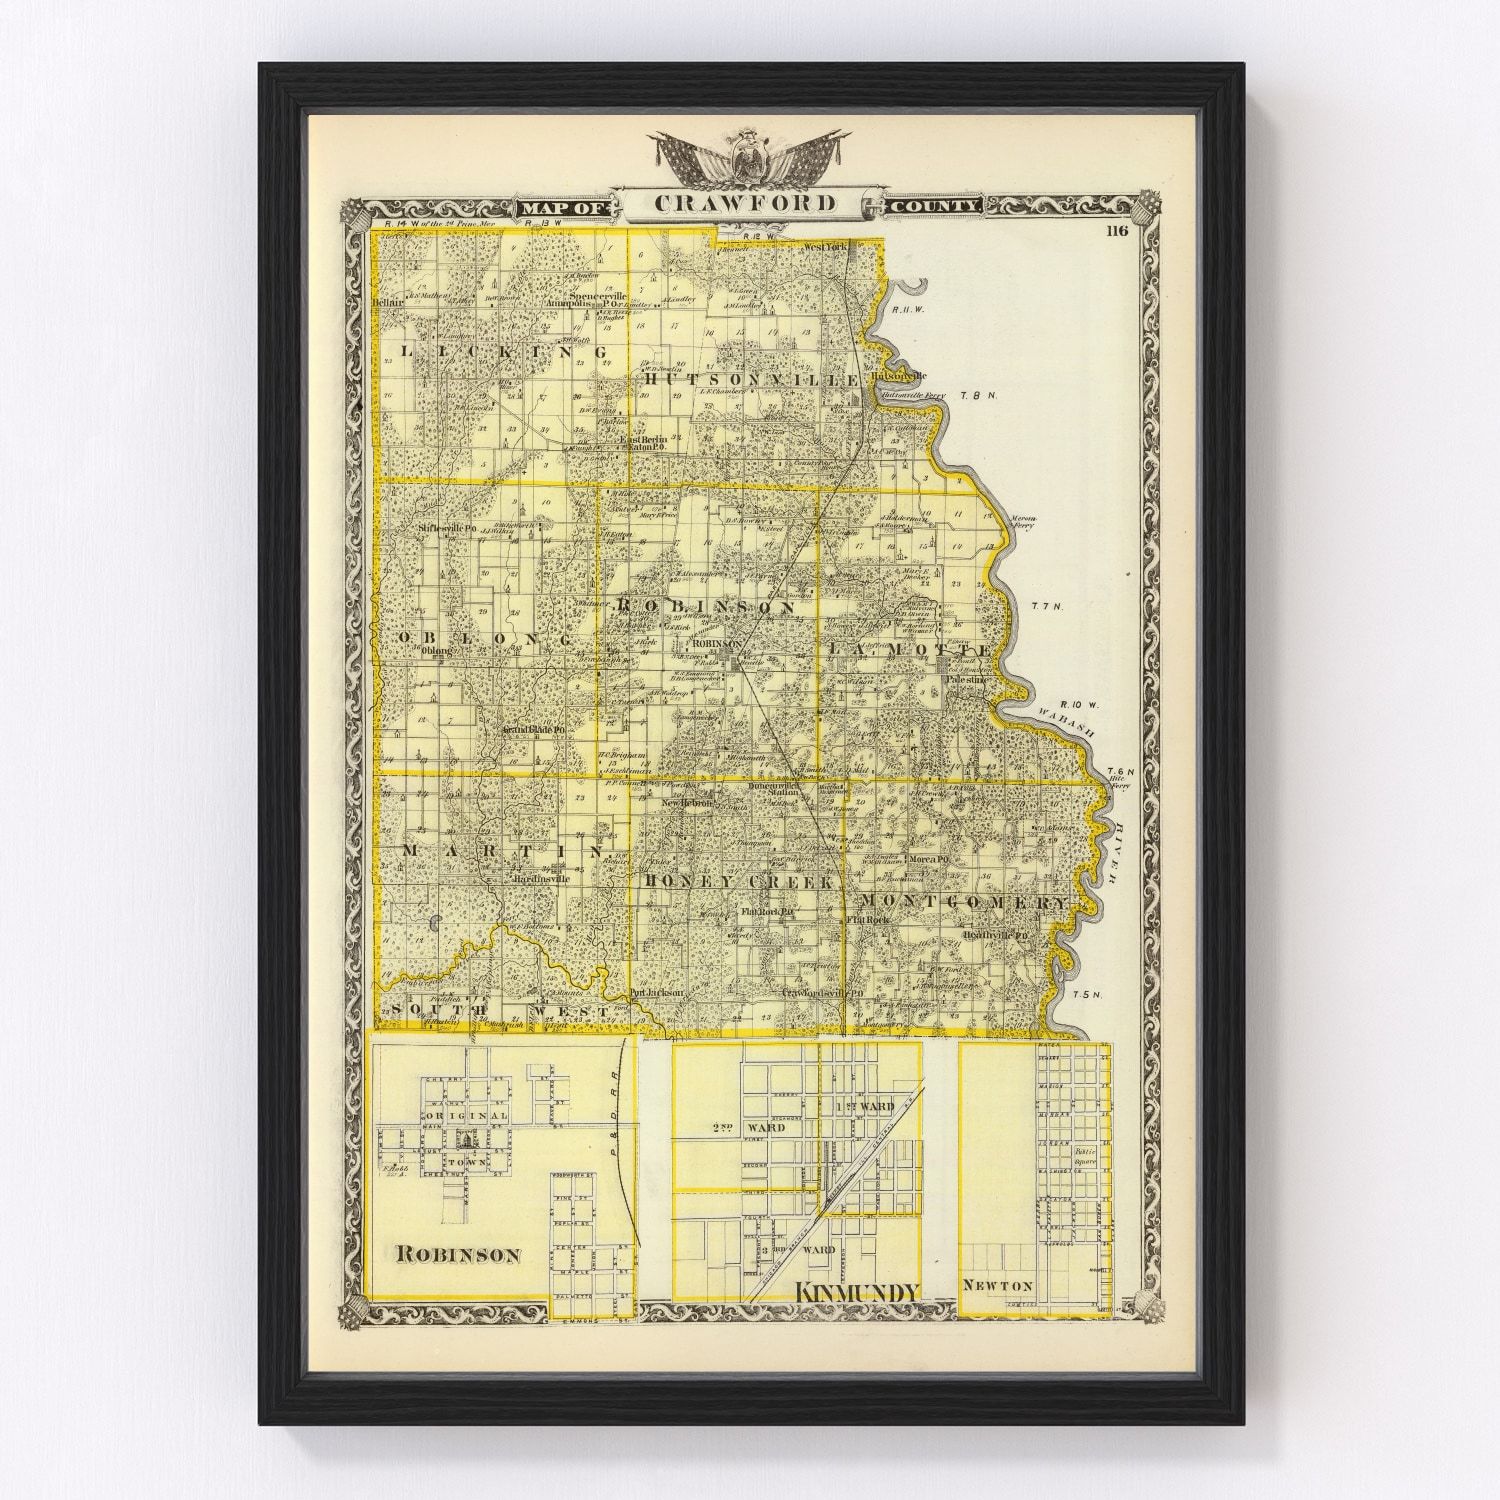 Vintage Map Of Crawford County Illinois 1876 By Teds Vintage Art 1422